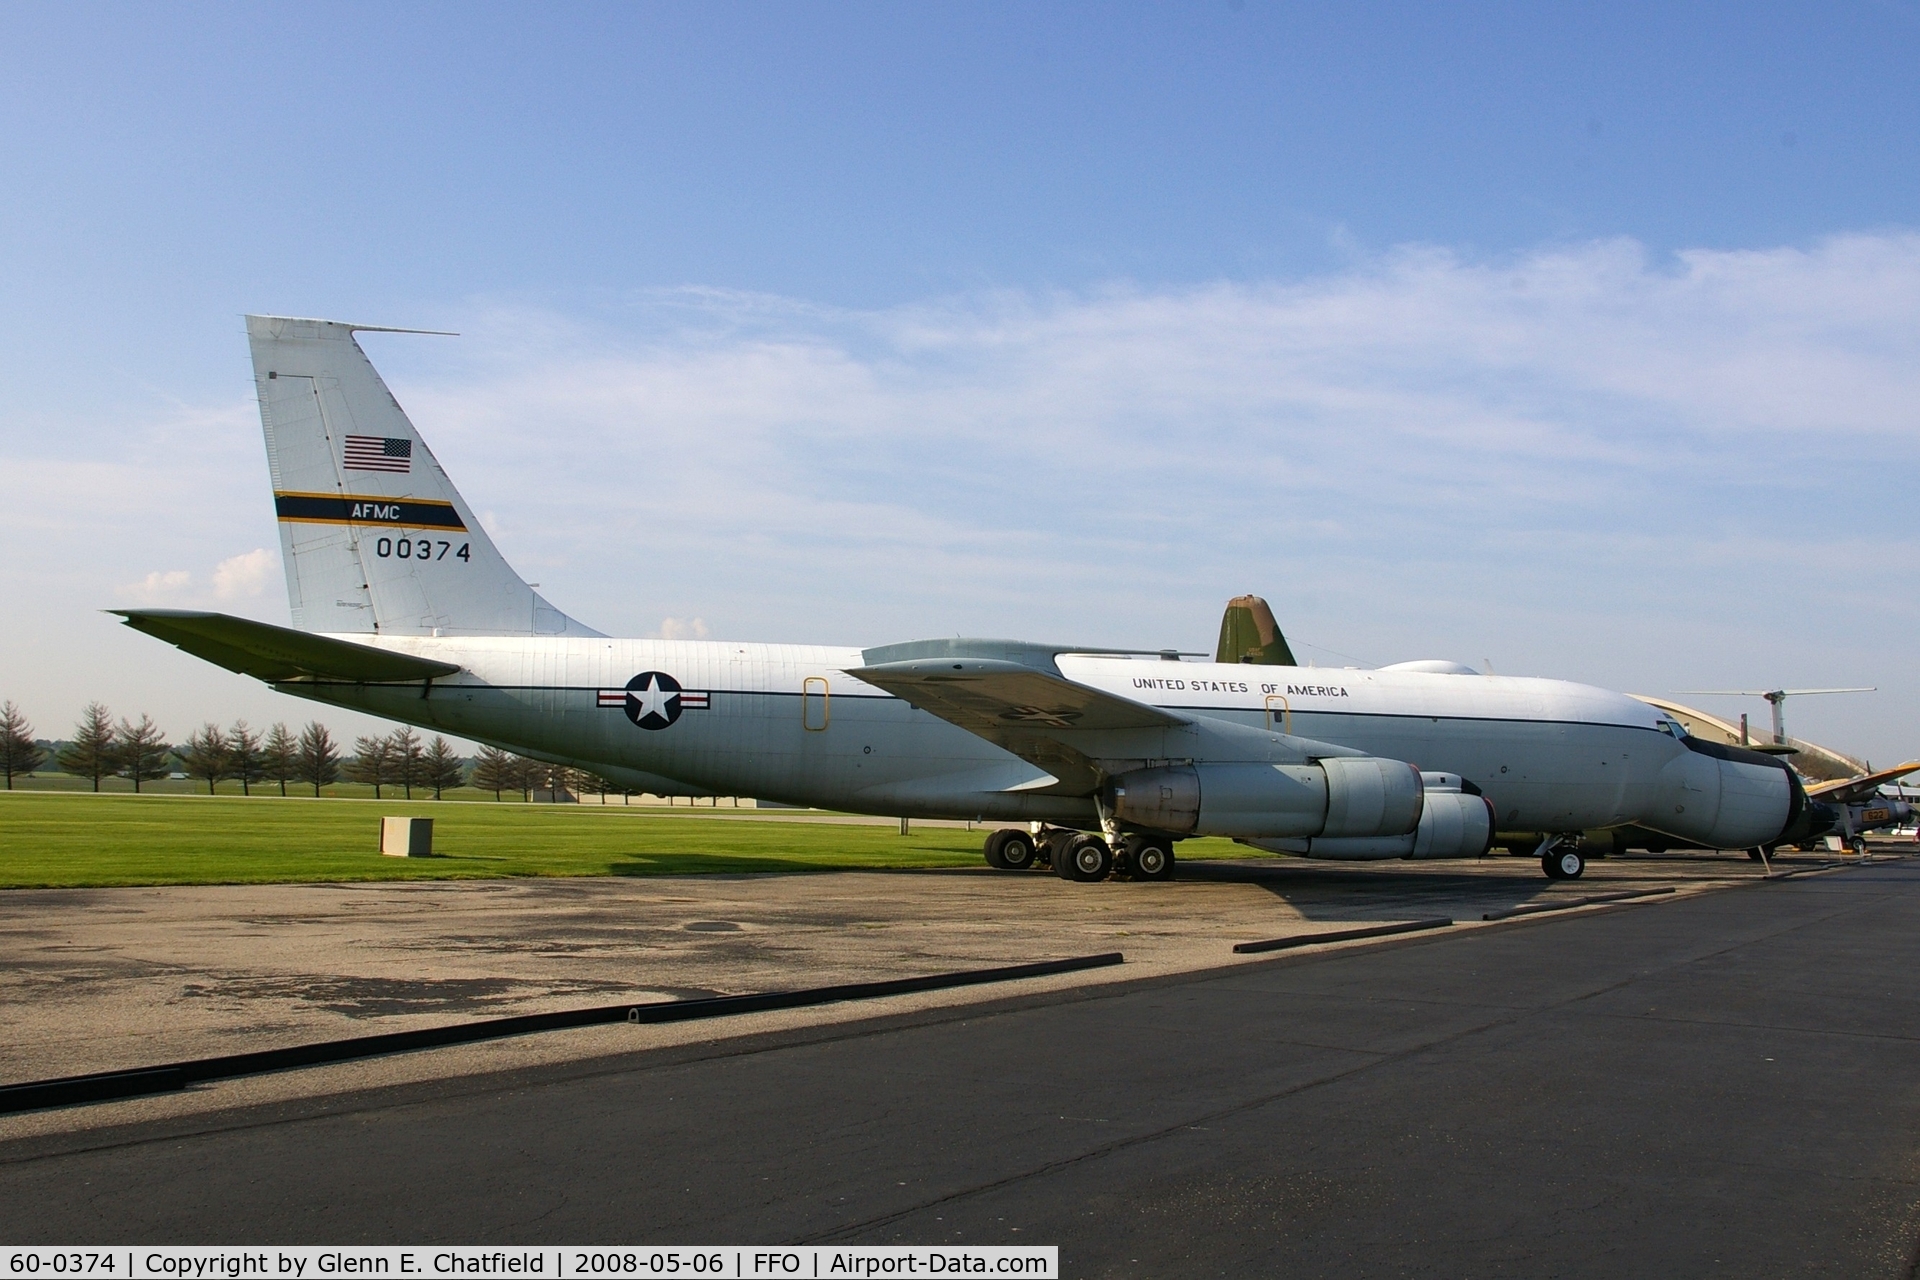 60-0374, 1960 Boeing EC-135N-BN Stratolifter C/N 18149, Parked outside of the National Museum of the U.S. Air Force